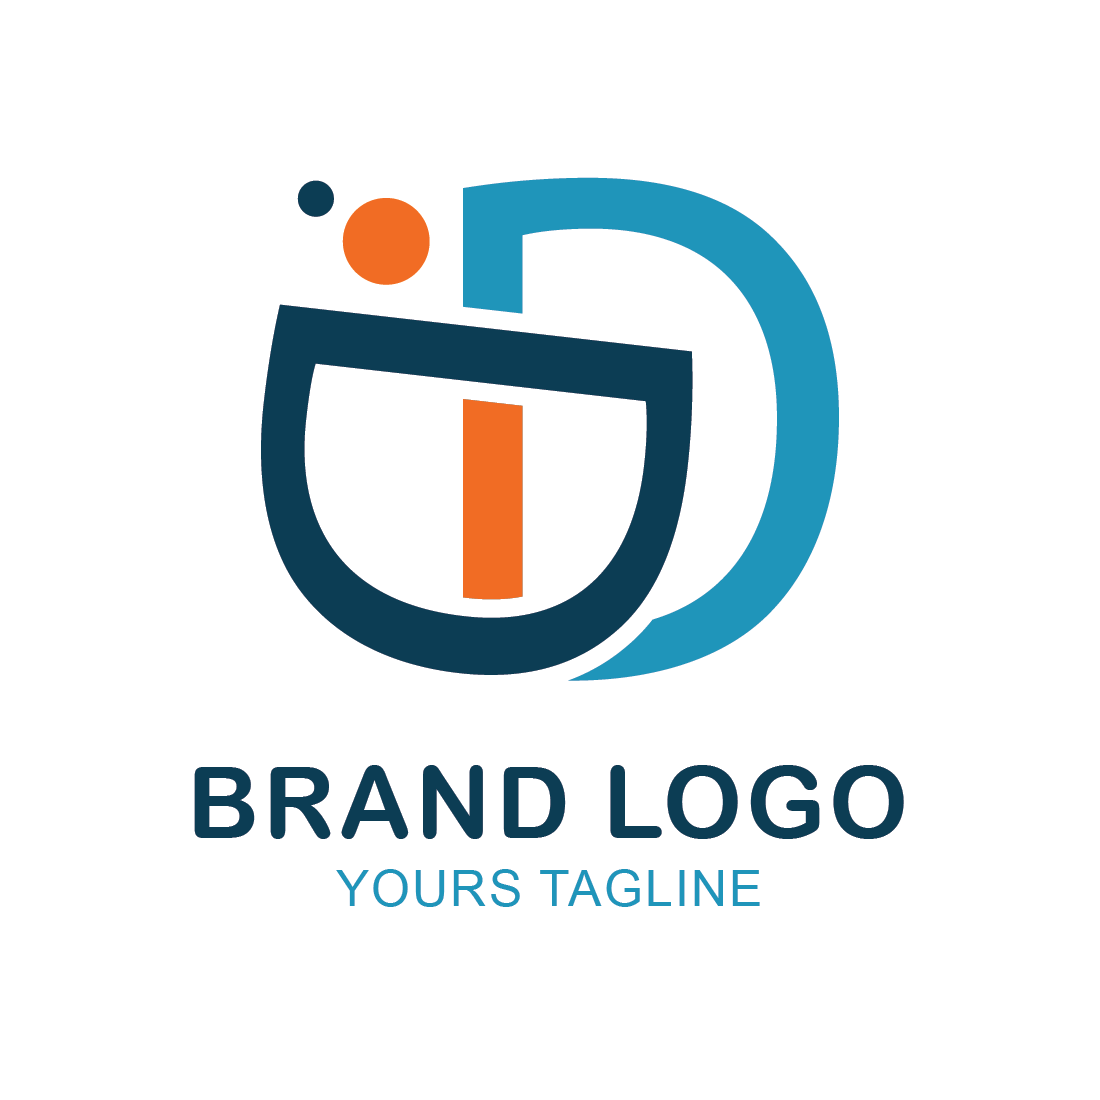 new and unique brand logo design || d letter logo design for your company, brand and businesses cover image.